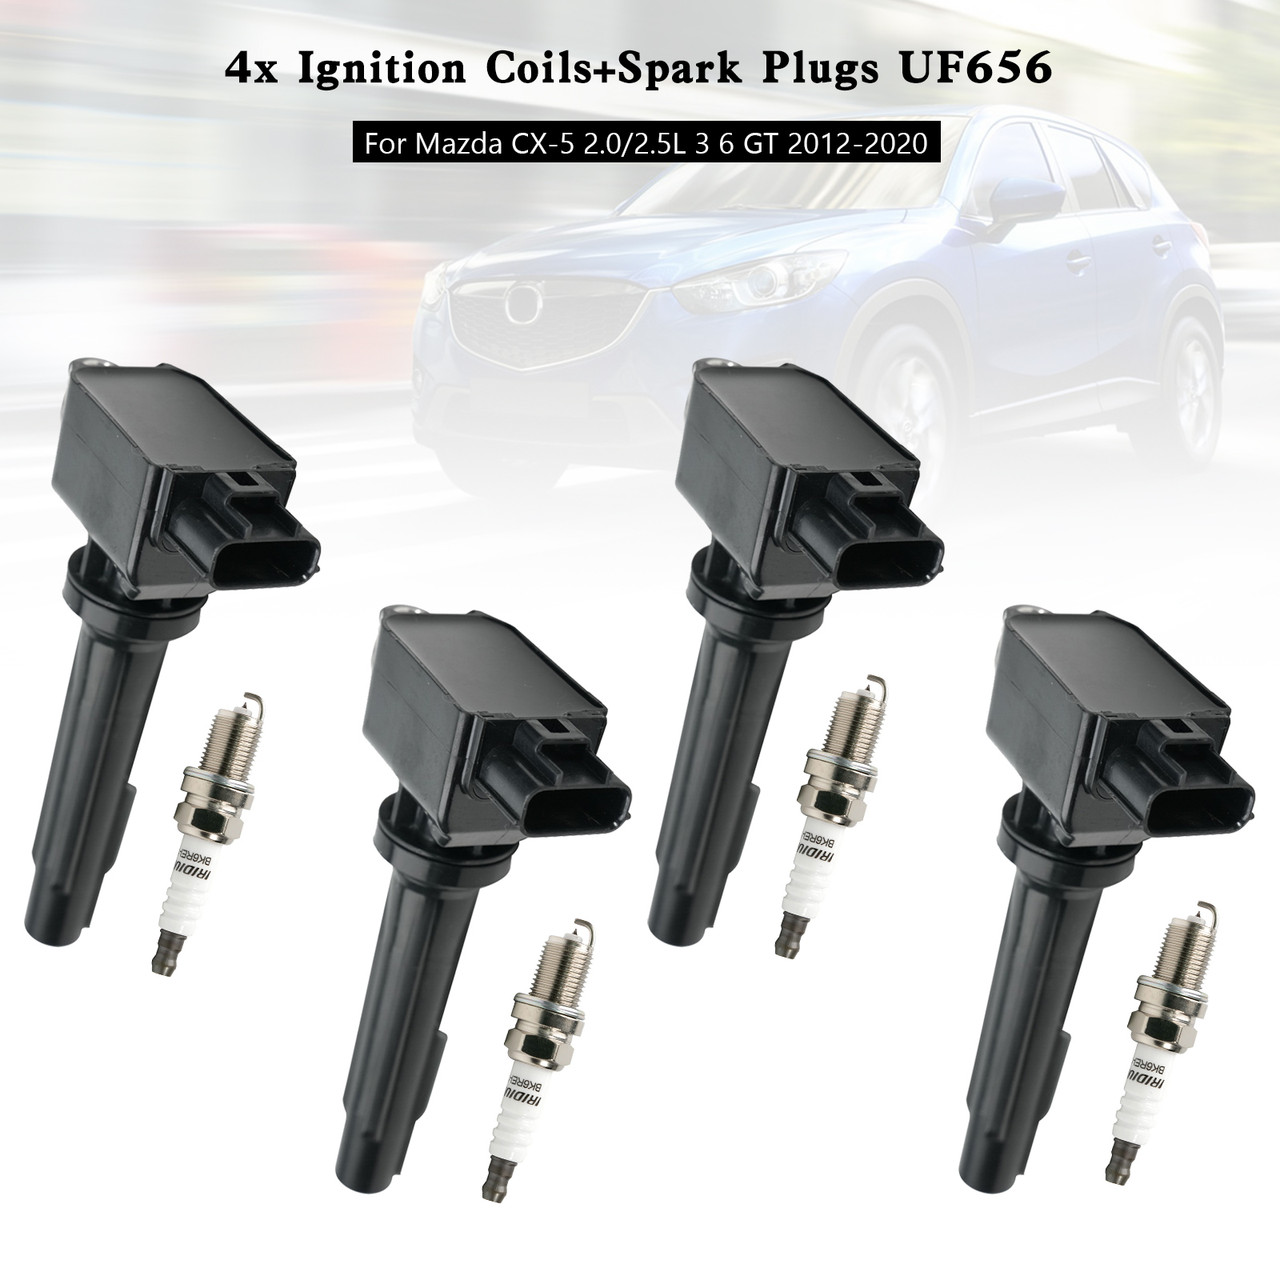 4x Ignition Coils+Spark Plugs UF656 For Mazda CX-5 2.0/2.5L 3 6 GT 2012-2020